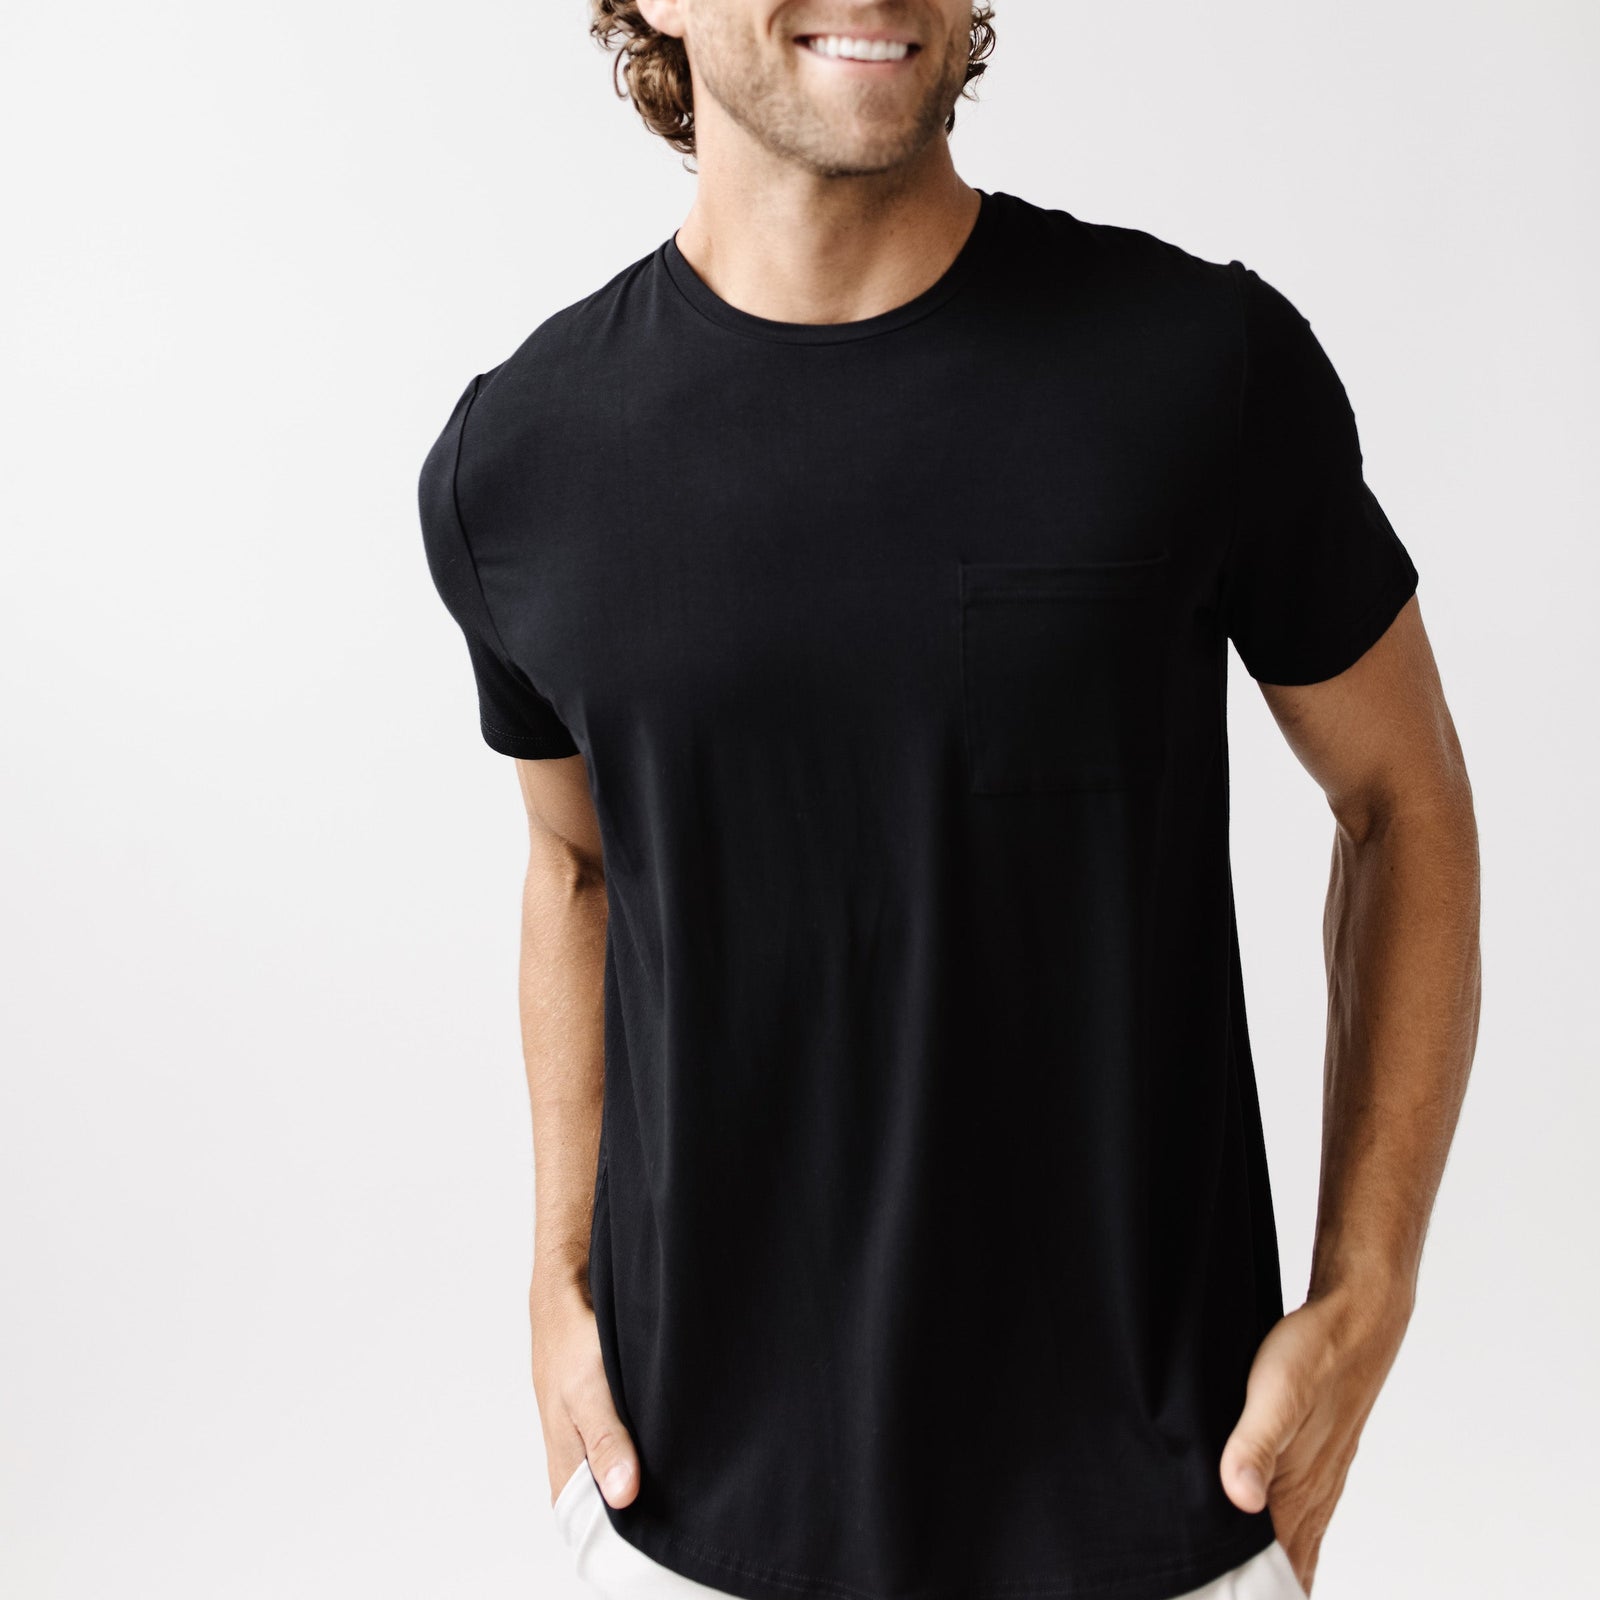 Black Men's Stretch-Knit Bamboo Lounge Tee. A man is wearing the lounge tee in a well lit home.